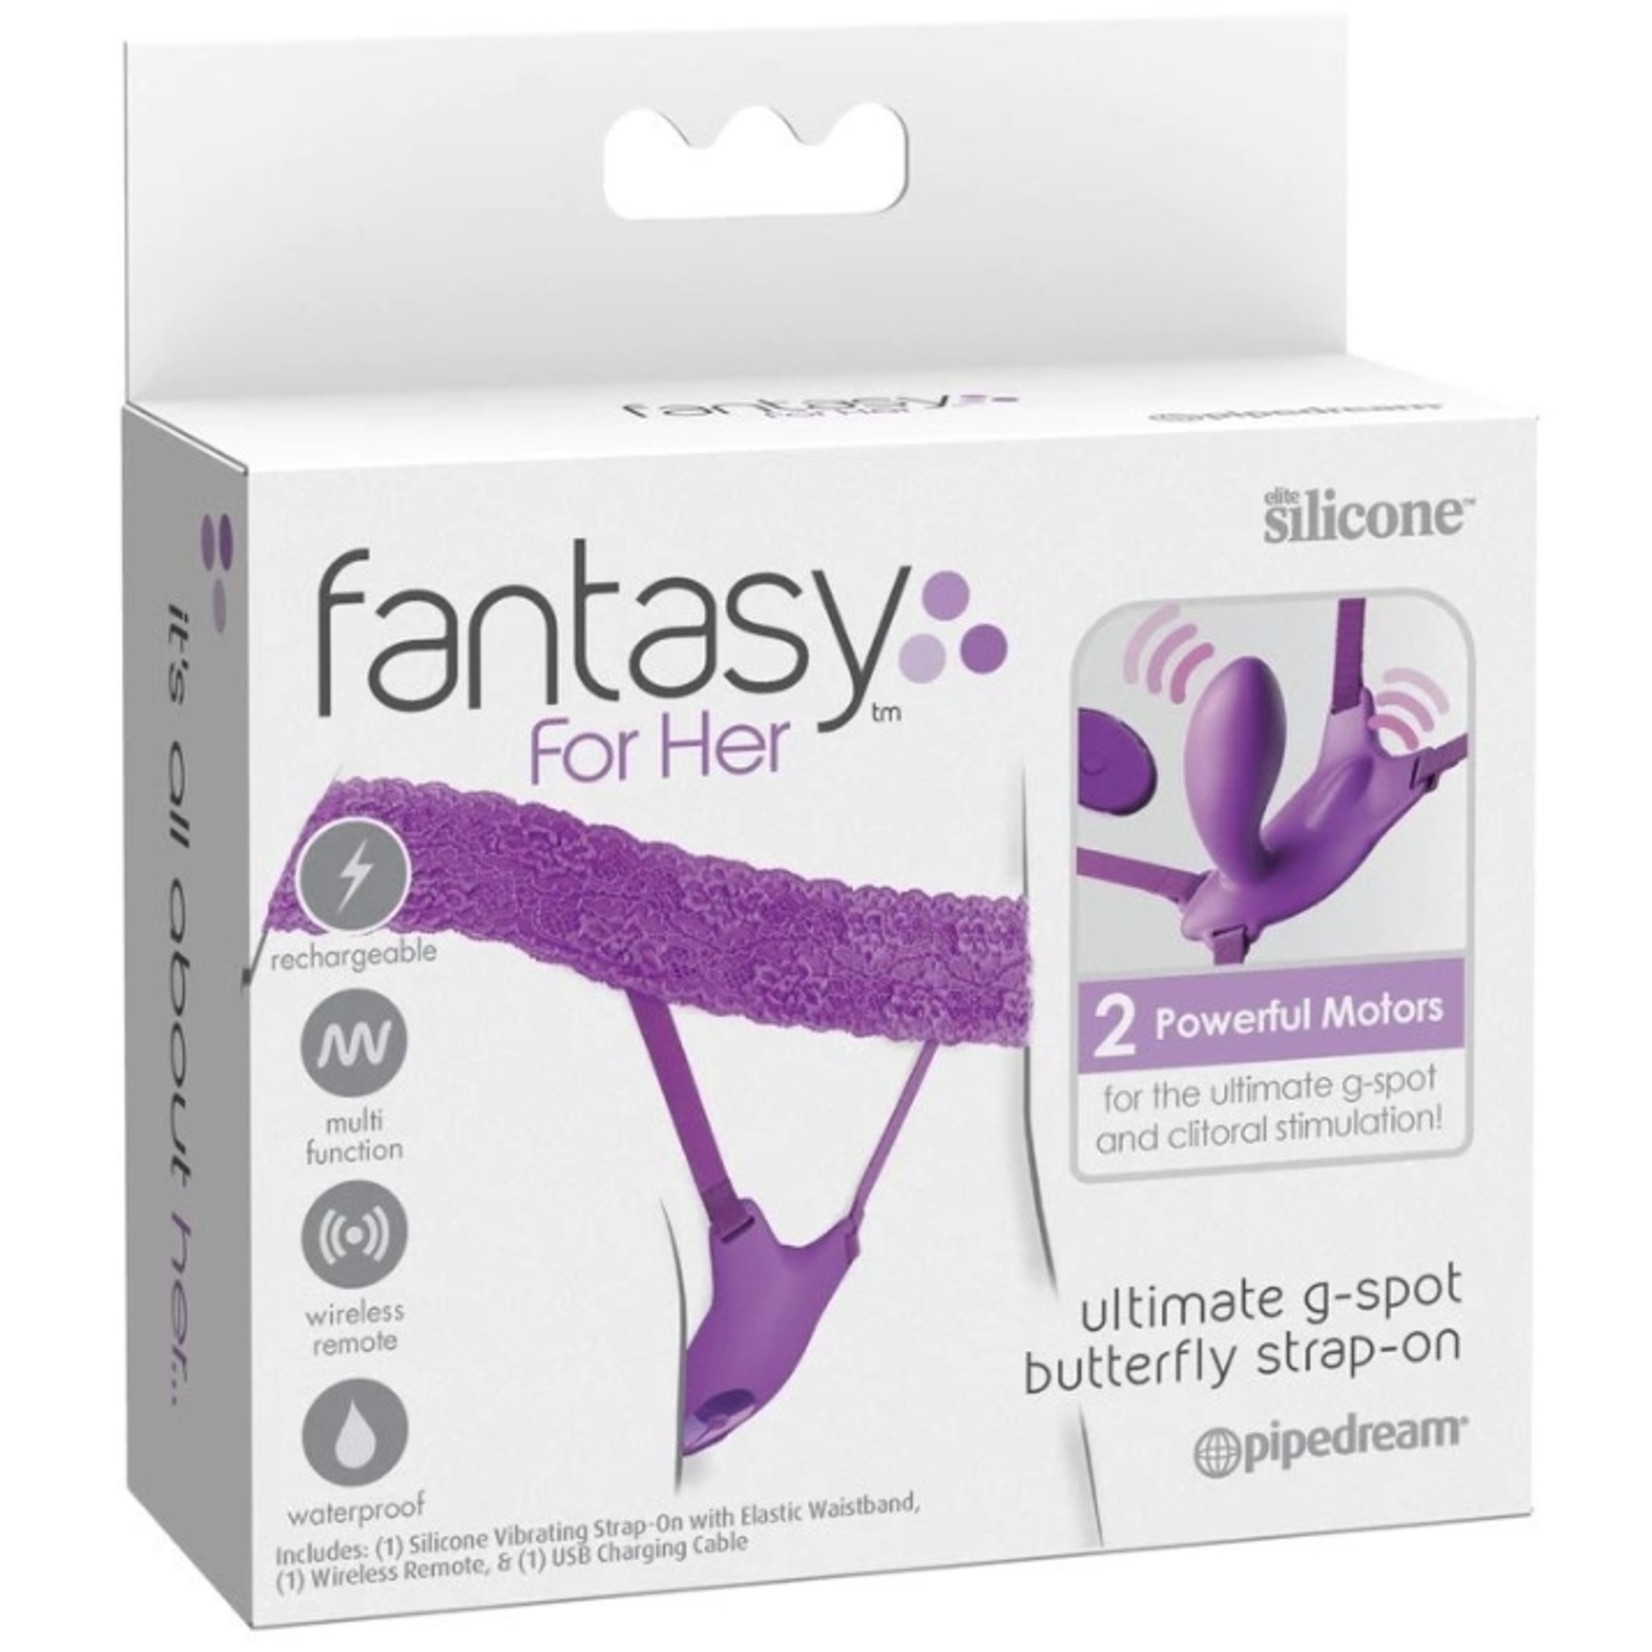 FANTASY FOR HER FANTASY FOR HER - ULTIMATE G-SPOT BUTTERFLY STRAP-ON